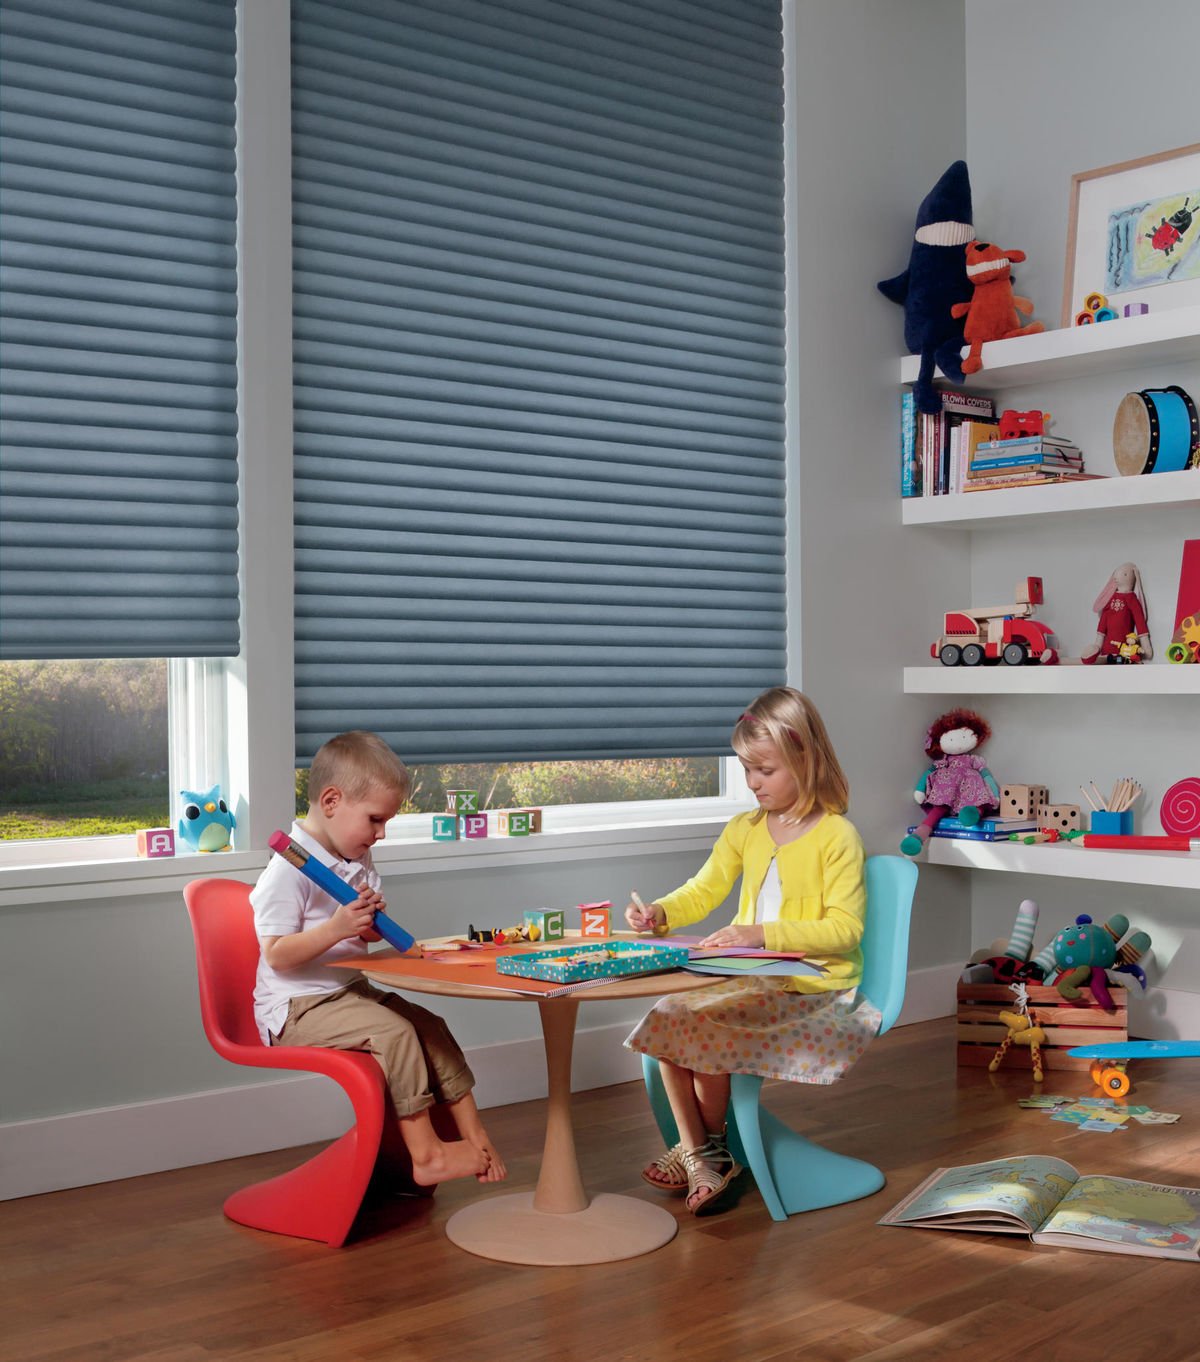 Sonnette SoftTouch cordless window coverings child safe.jpg